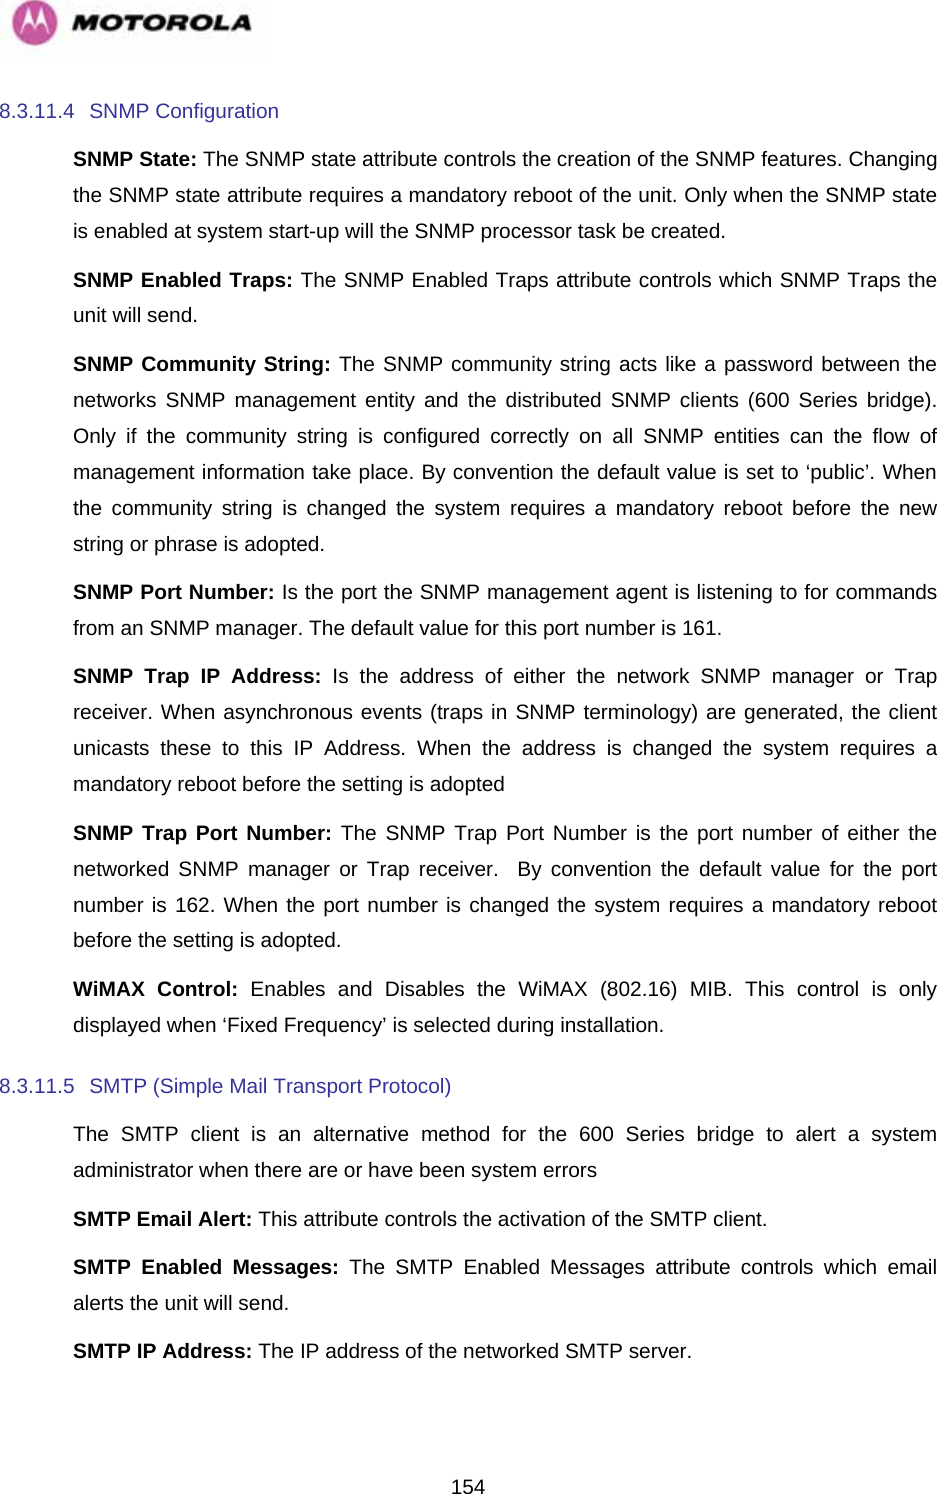   1548.3.11.4 SNMP Configuration SNMP State: The SNMP state attribute controls the creation of the SNMP features. Changing the SNMP state attribute requires a mandatory reboot of the unit. Only when the SNMP state is enabled at system start-up will the SNMP processor task be created. SNMP Enabled Traps: The SNMP Enabled Traps attribute controls which SNMP Traps the unit will send. SNMP Community String: The SNMP community string acts like a password between the networks SNMP management entity and the distributed SNMP clients (600 Series bridge). Only if the community string is configured correctly on all SNMP entities can the flow of management information take place. By convention the default value is set to ‘public’. When the community string is changed the system requires a mandatory reboot before the new string or phrase is adopted. SNMP Port Number: Is the port the SNMP management agent is listening to for commands from an SNMP manager. The default value for this port number is 161. SNMP Trap IP Address: Is the address of either the network SNMP manager or Trap receiver. When asynchronous events (traps in SNMP terminology) are generated, the client unicasts these to this IP Address. When the address is changed the system requires a mandatory reboot before the setting is adopted SNMP Trap Port Number: The SNMP Trap Port Number is the port number of either the networked SNMP manager or Trap receiver.  By convention the default value for the port number is 162. When the port number is changed the system requires a mandatory reboot before the setting is adopted. WiMAX Control: Enables and Disables the WiMAX (802.16) MIB. This control is only displayed when ‘Fixed Frequency’ is selected during installation. 8.3.11.5  SMTP (Simple Mail Transport Protocol) The SMTP client is an alternative method for the 600 Series bridge to alert a system administrator when there are or have been system errors SMTP Email Alert: This attribute controls the activation of the SMTP client. SMTP Enabled Messages: The SMTP Enabled Messages attribute controls which email alerts the unit will send. SMTP IP Address: The IP address of the networked SMTP server. 